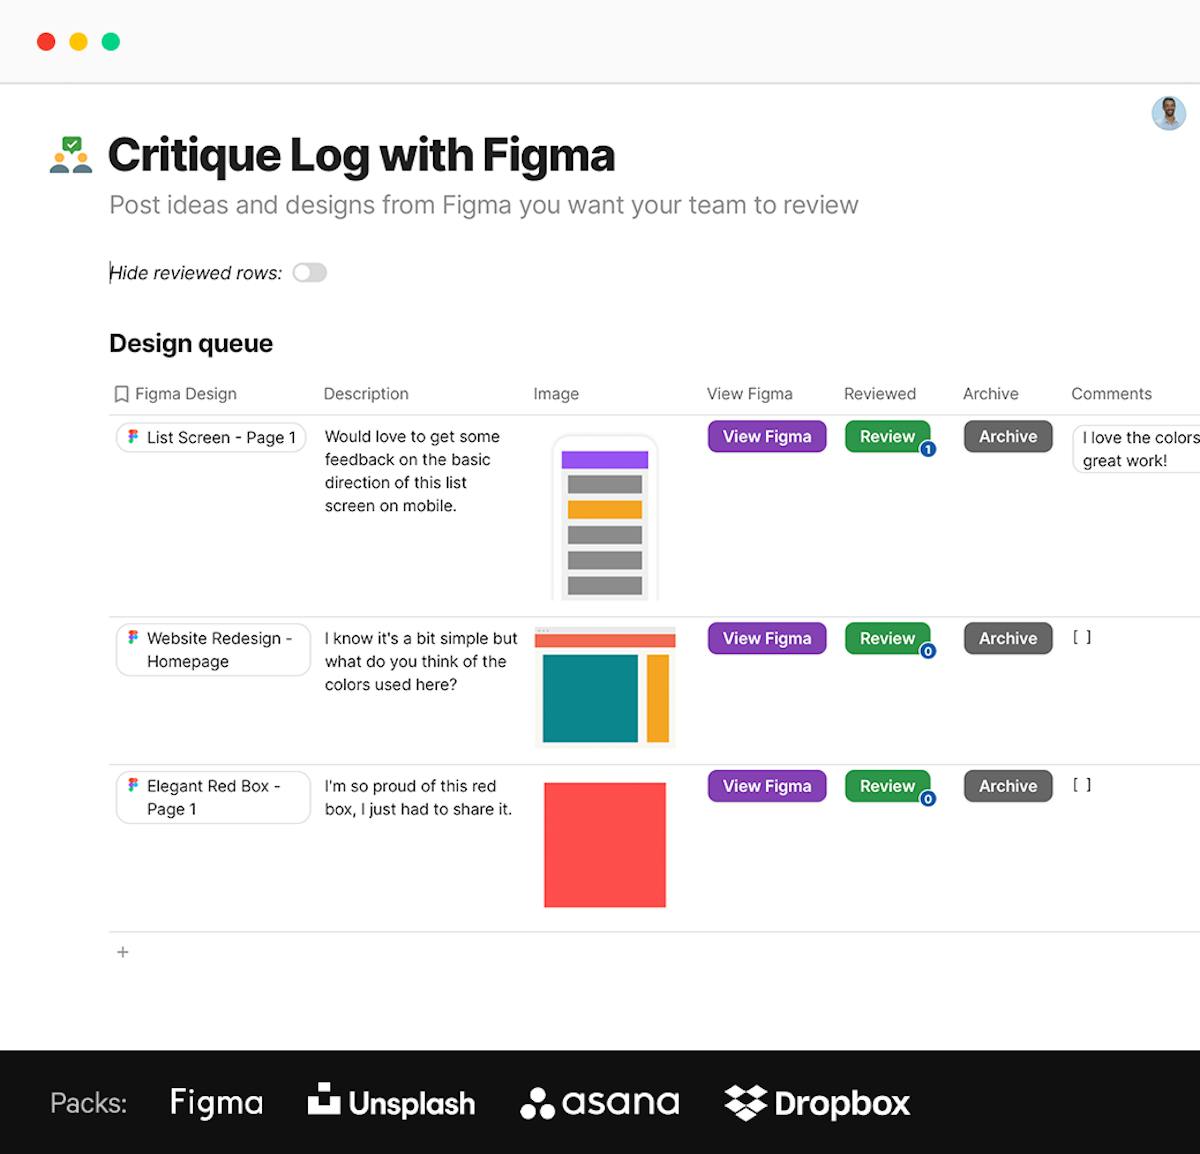 Critique log with Figma - a Coda doc where teams can post ideas and designs from Figma and then review and comment.